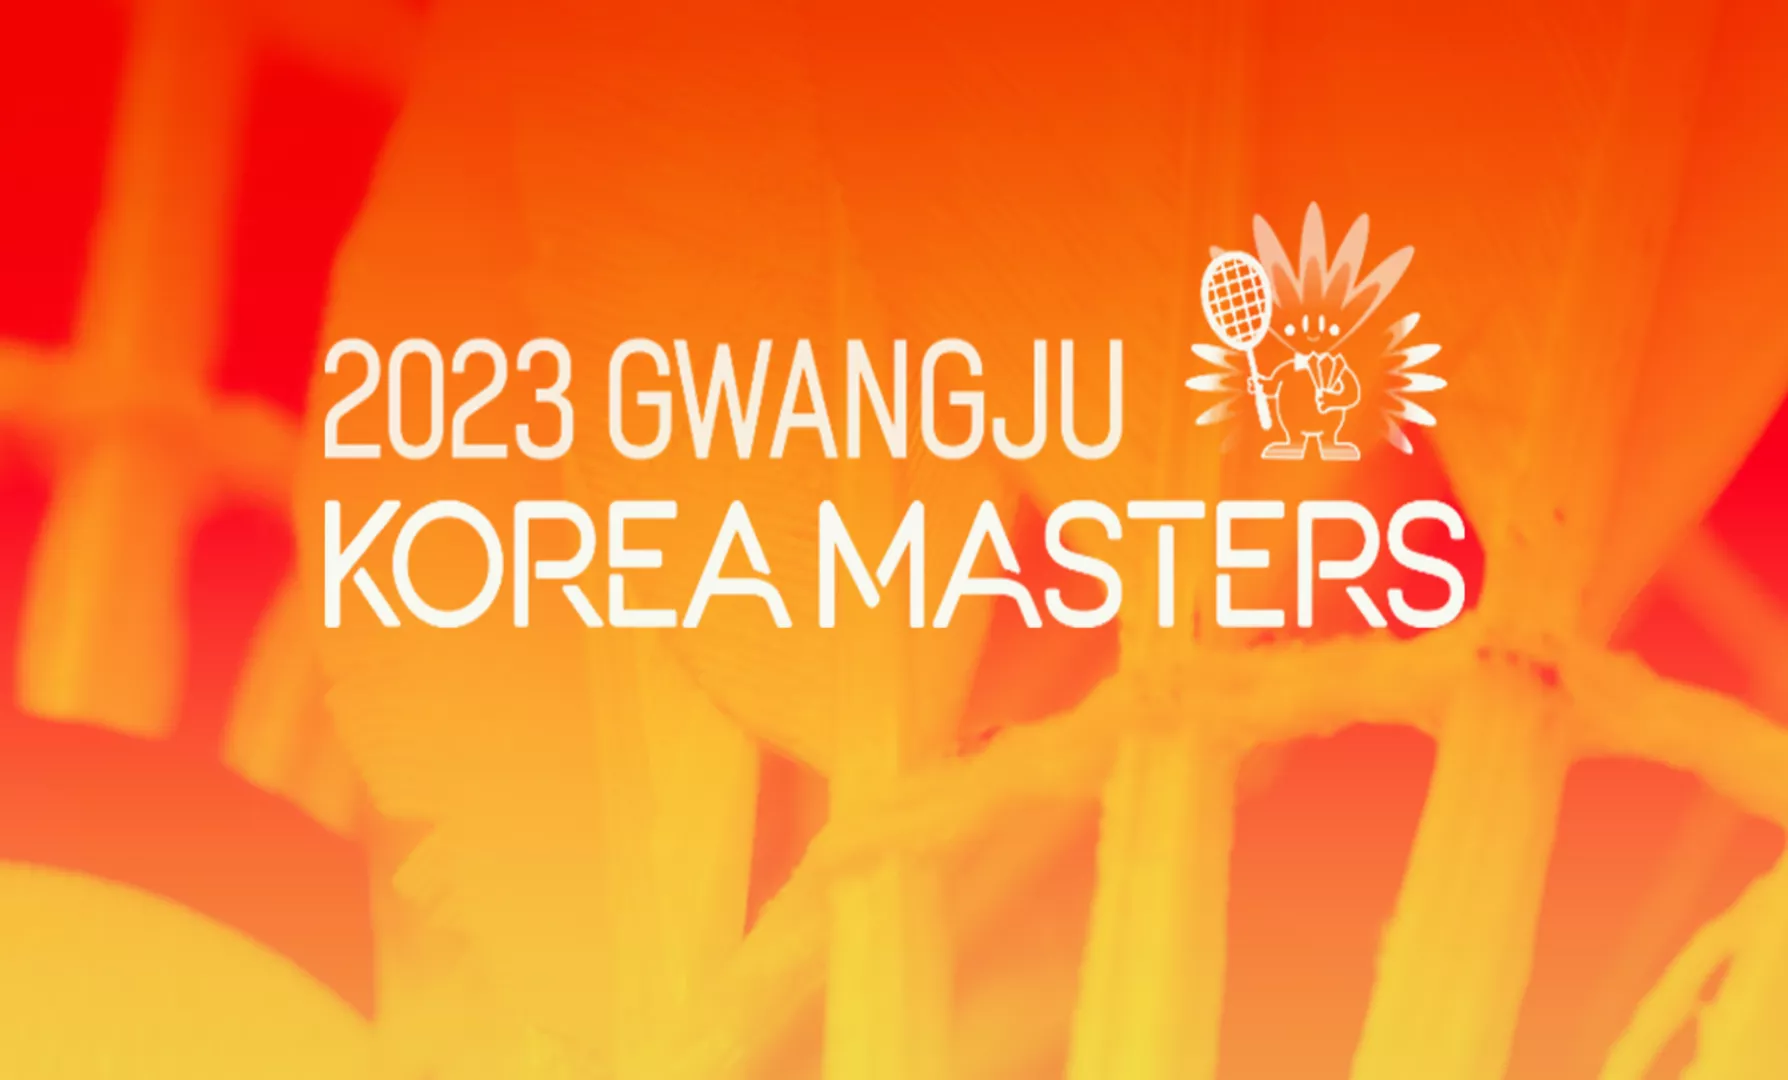 Where and how to watch BWF Korea Masters 2023 in Indonesia?